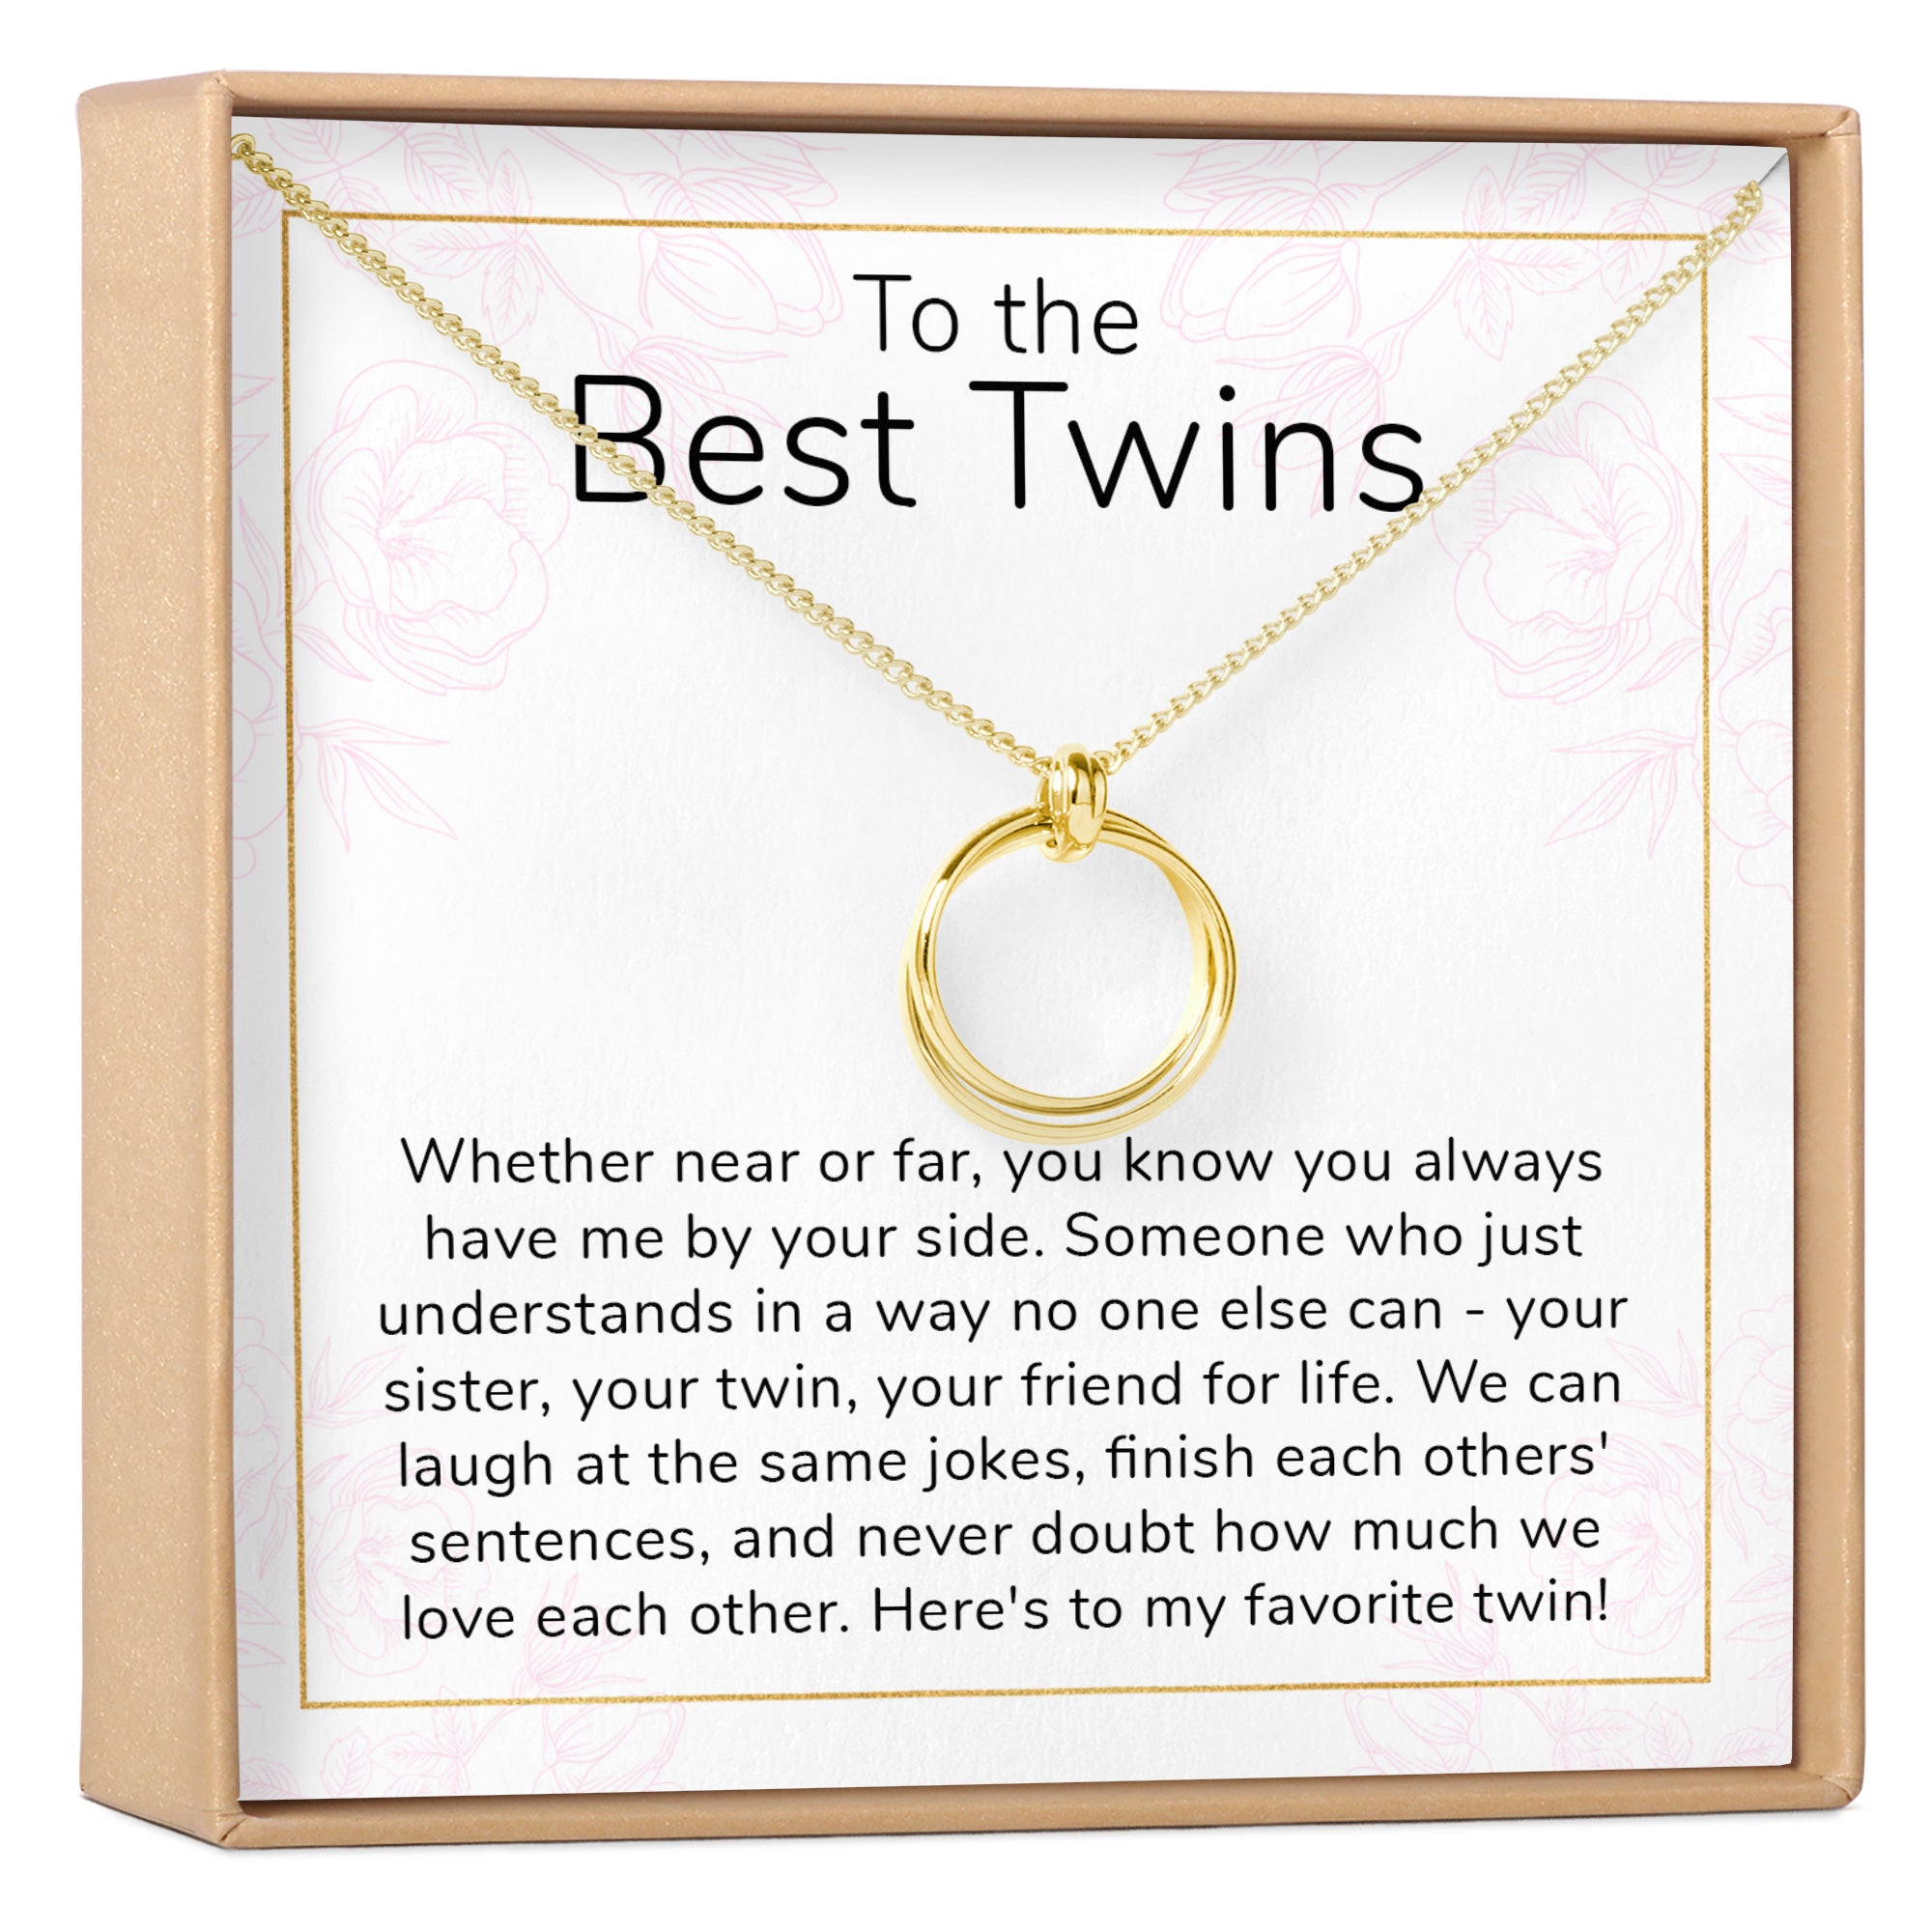 Gift Guide for Expecting Twin Moms - TwinGo